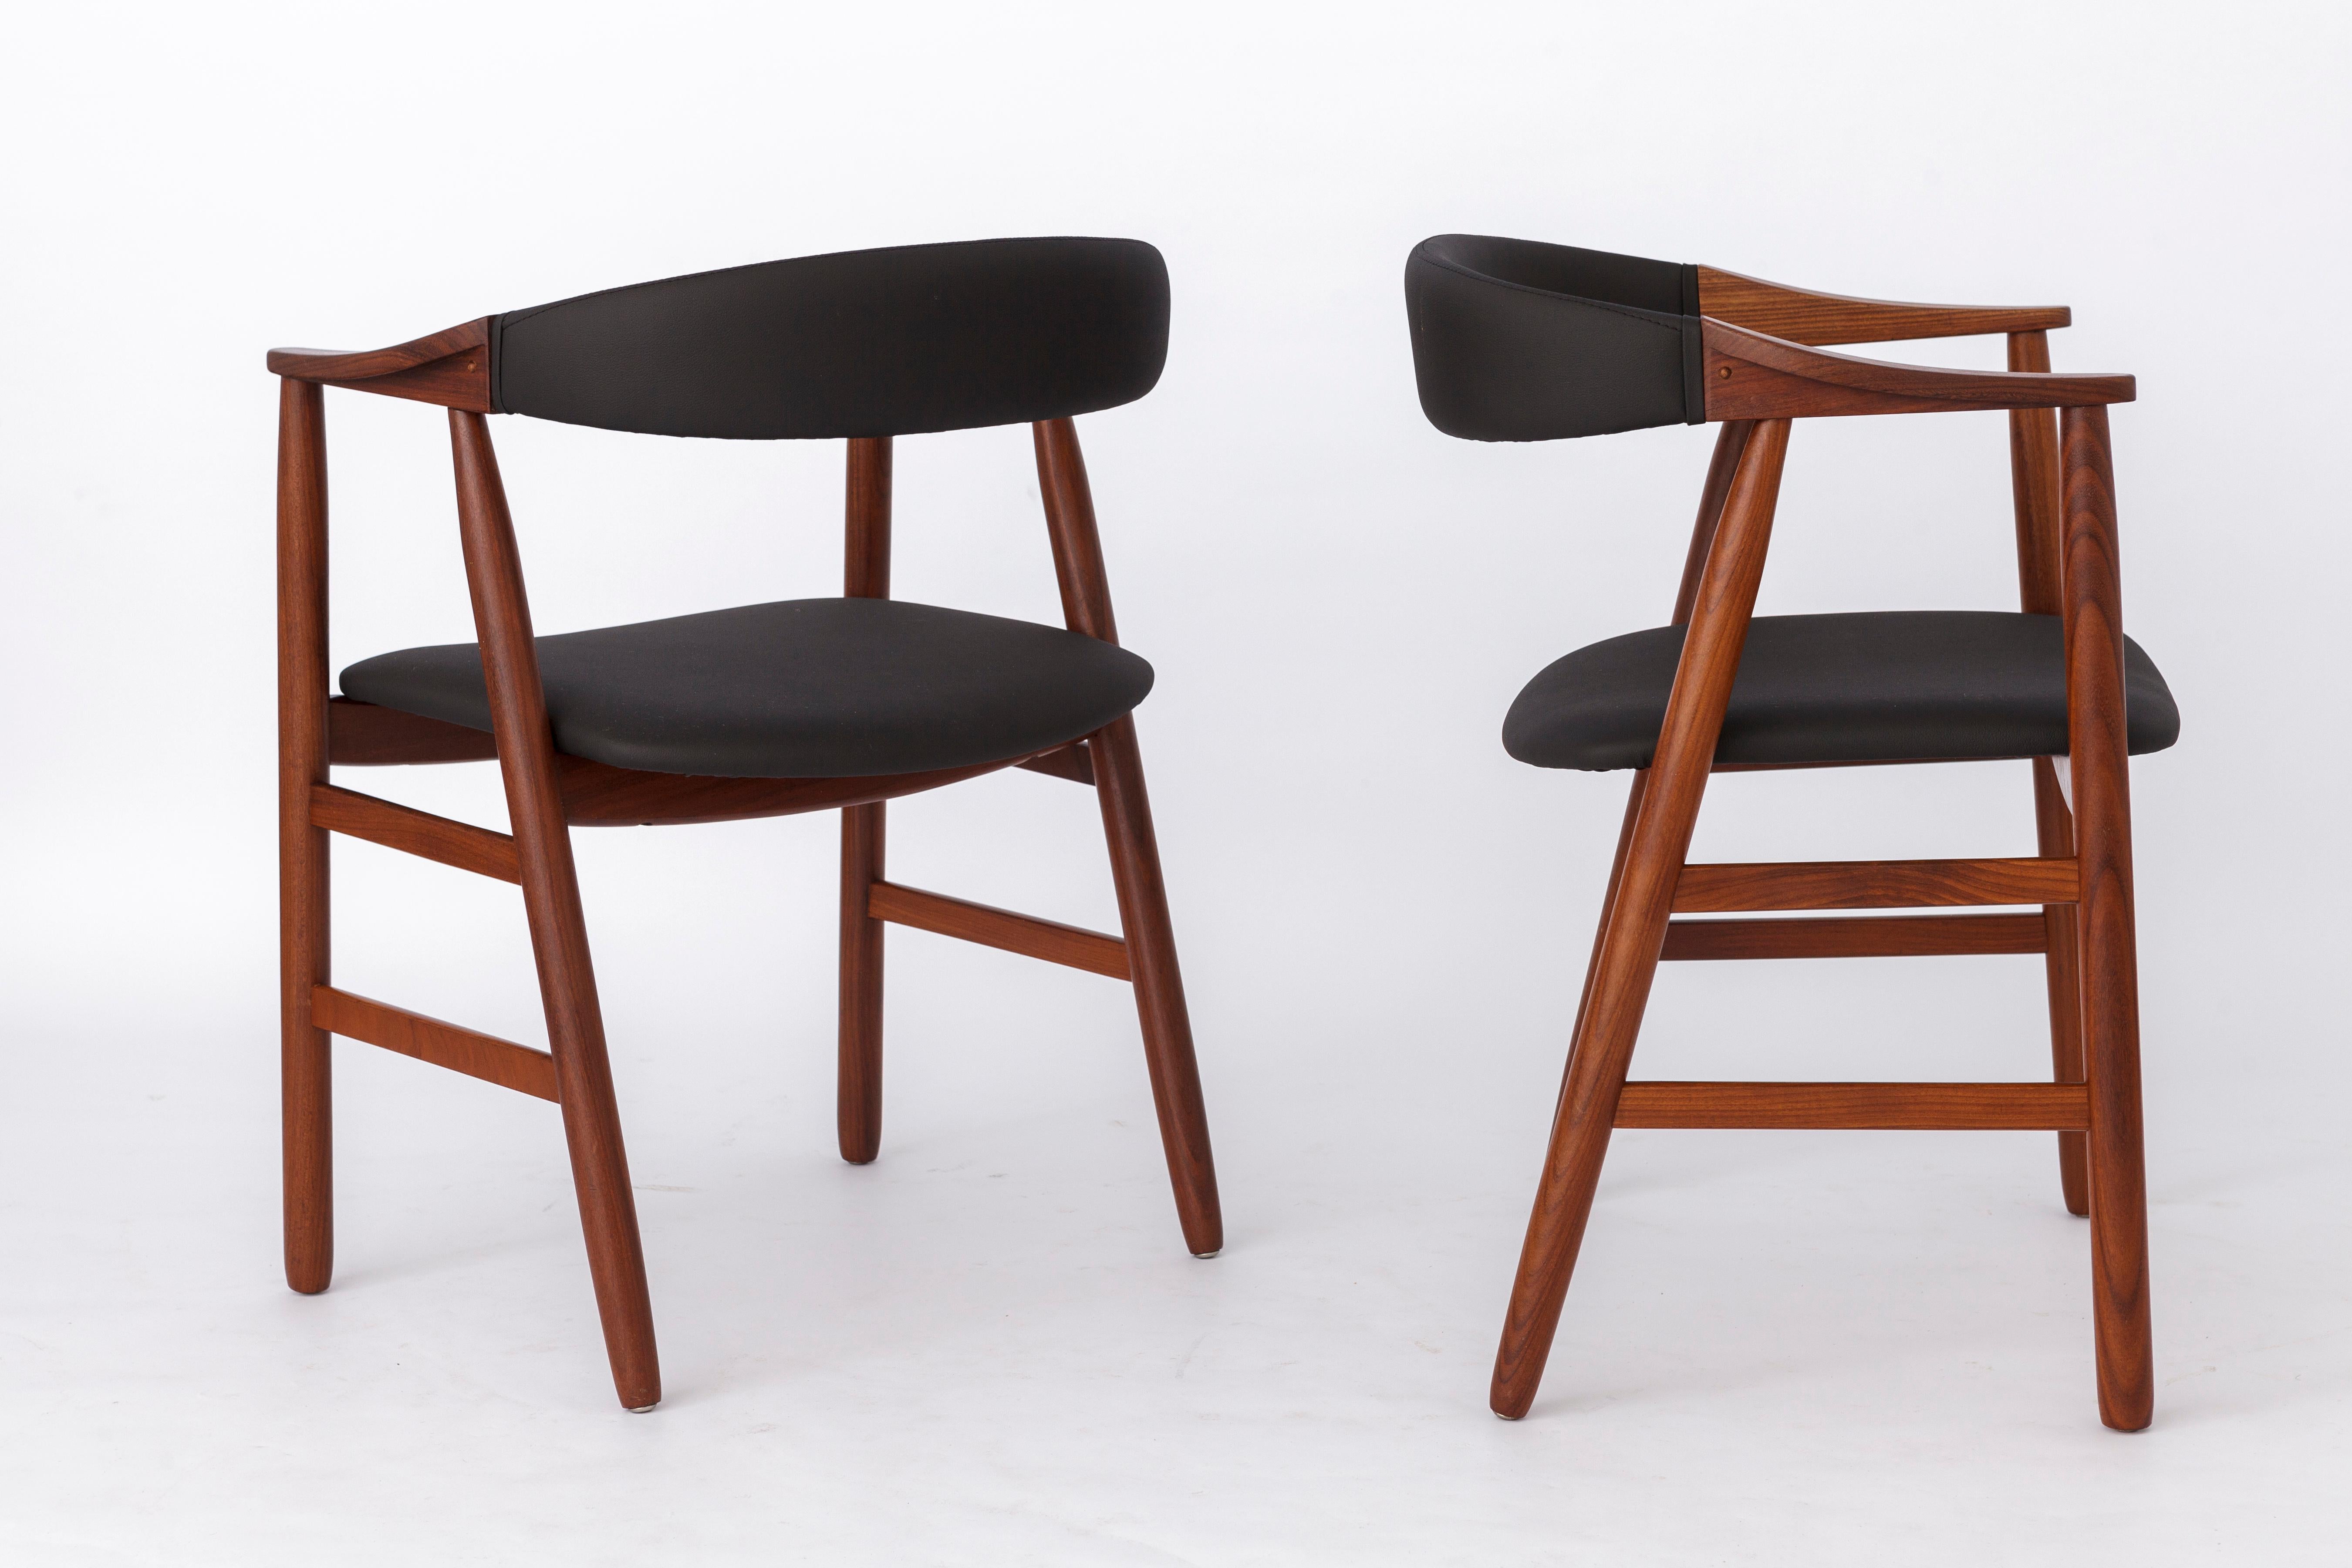 Mid-Century Modern 2 Vintage Chairs by Thomas Harlev, Model 213, Danish, for Farstrup, Teak, 1960s. For Sale